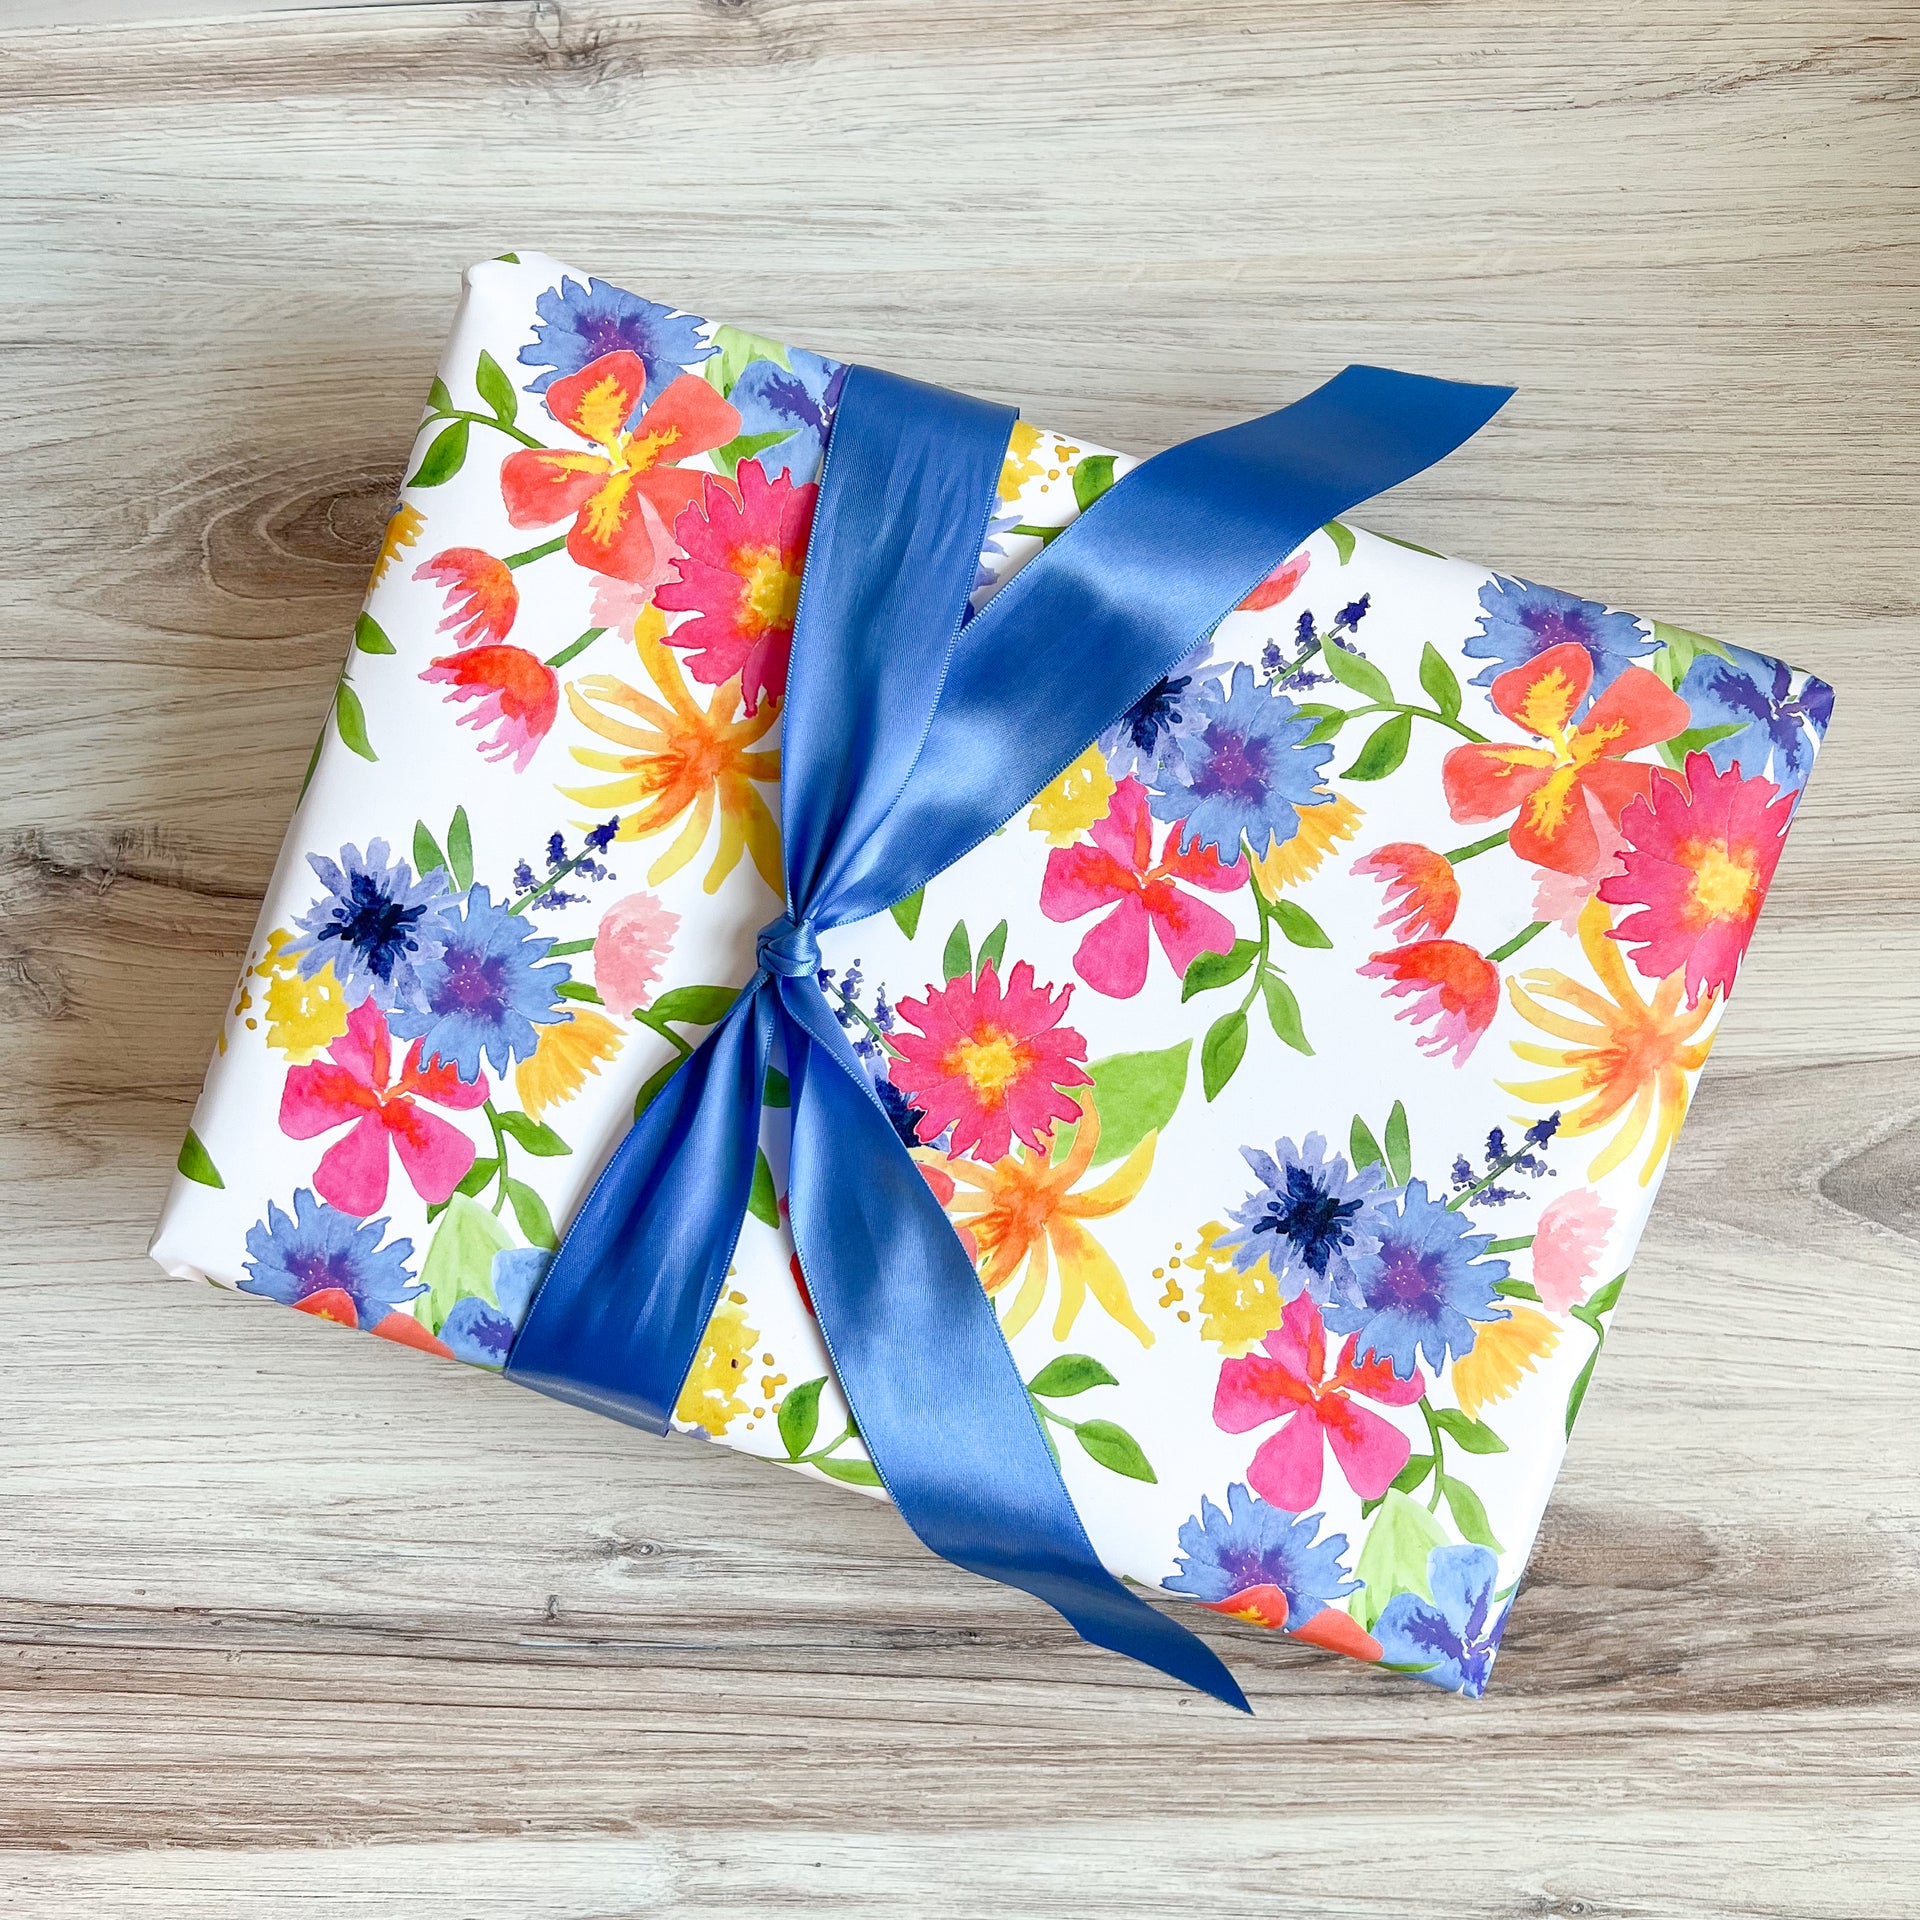 Wildflower Gift Wrap by Gert & Co